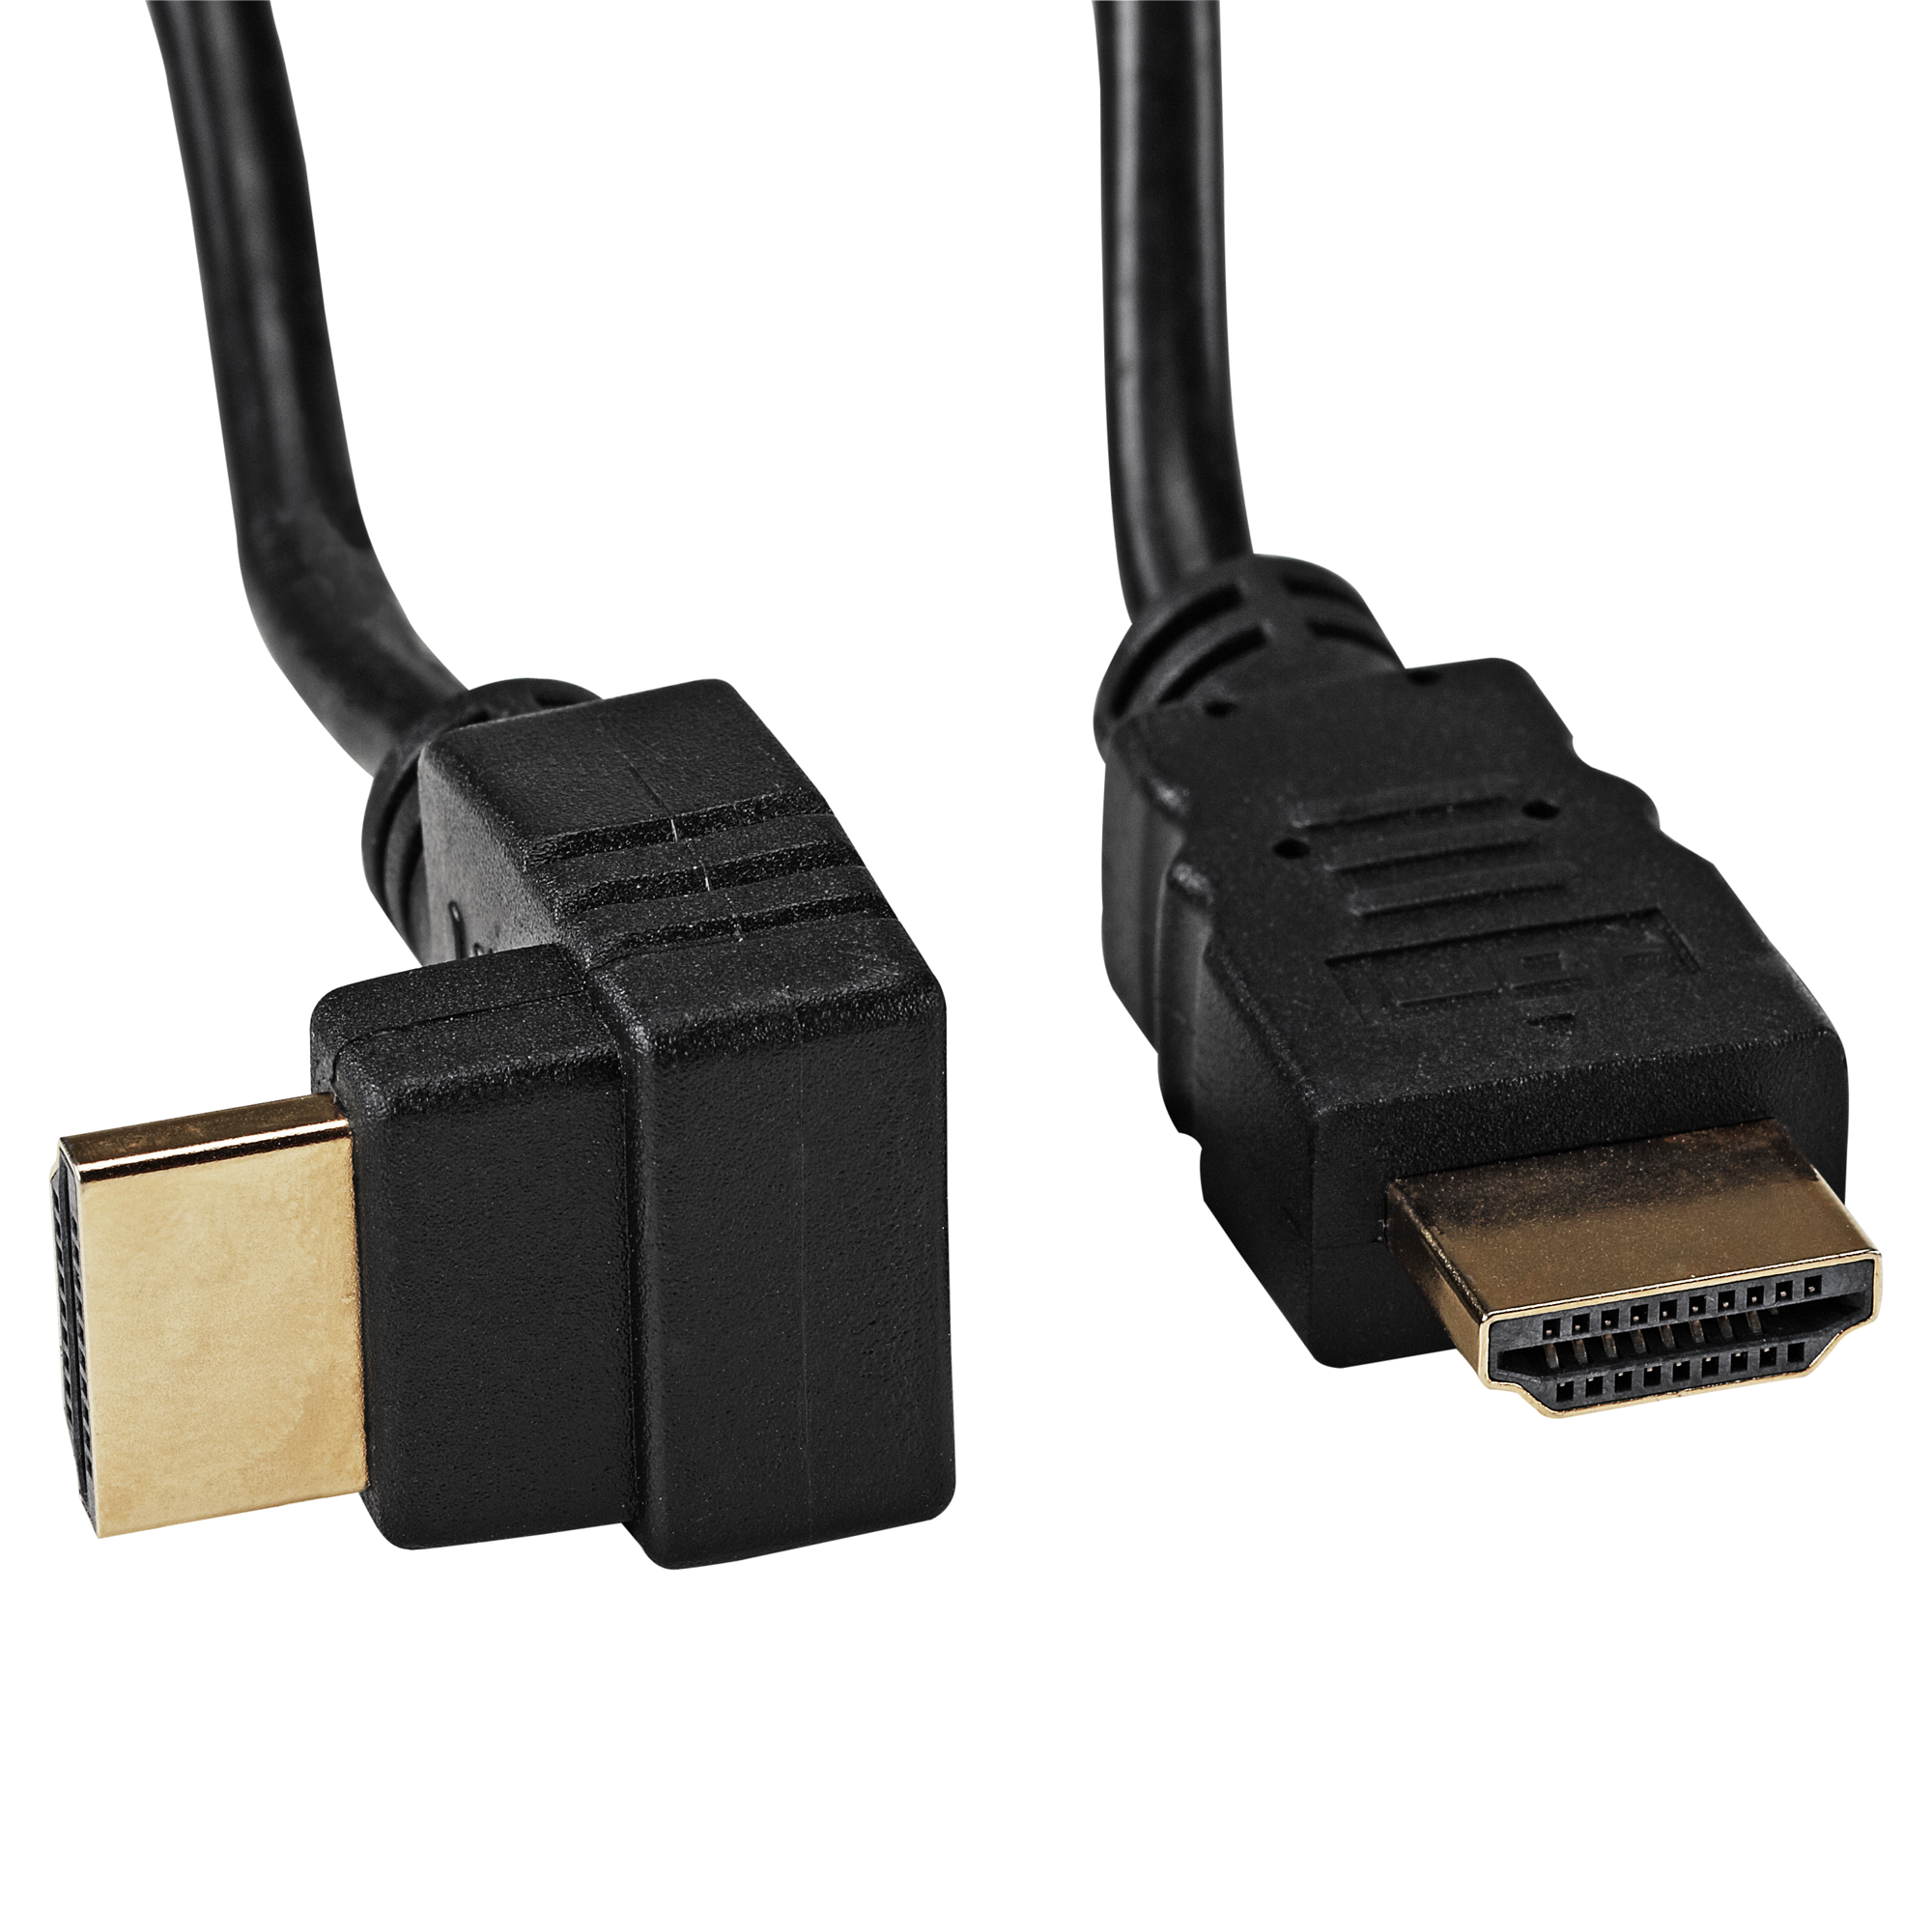 HDMI-Anschlusskabel mit Ethernet + product picture